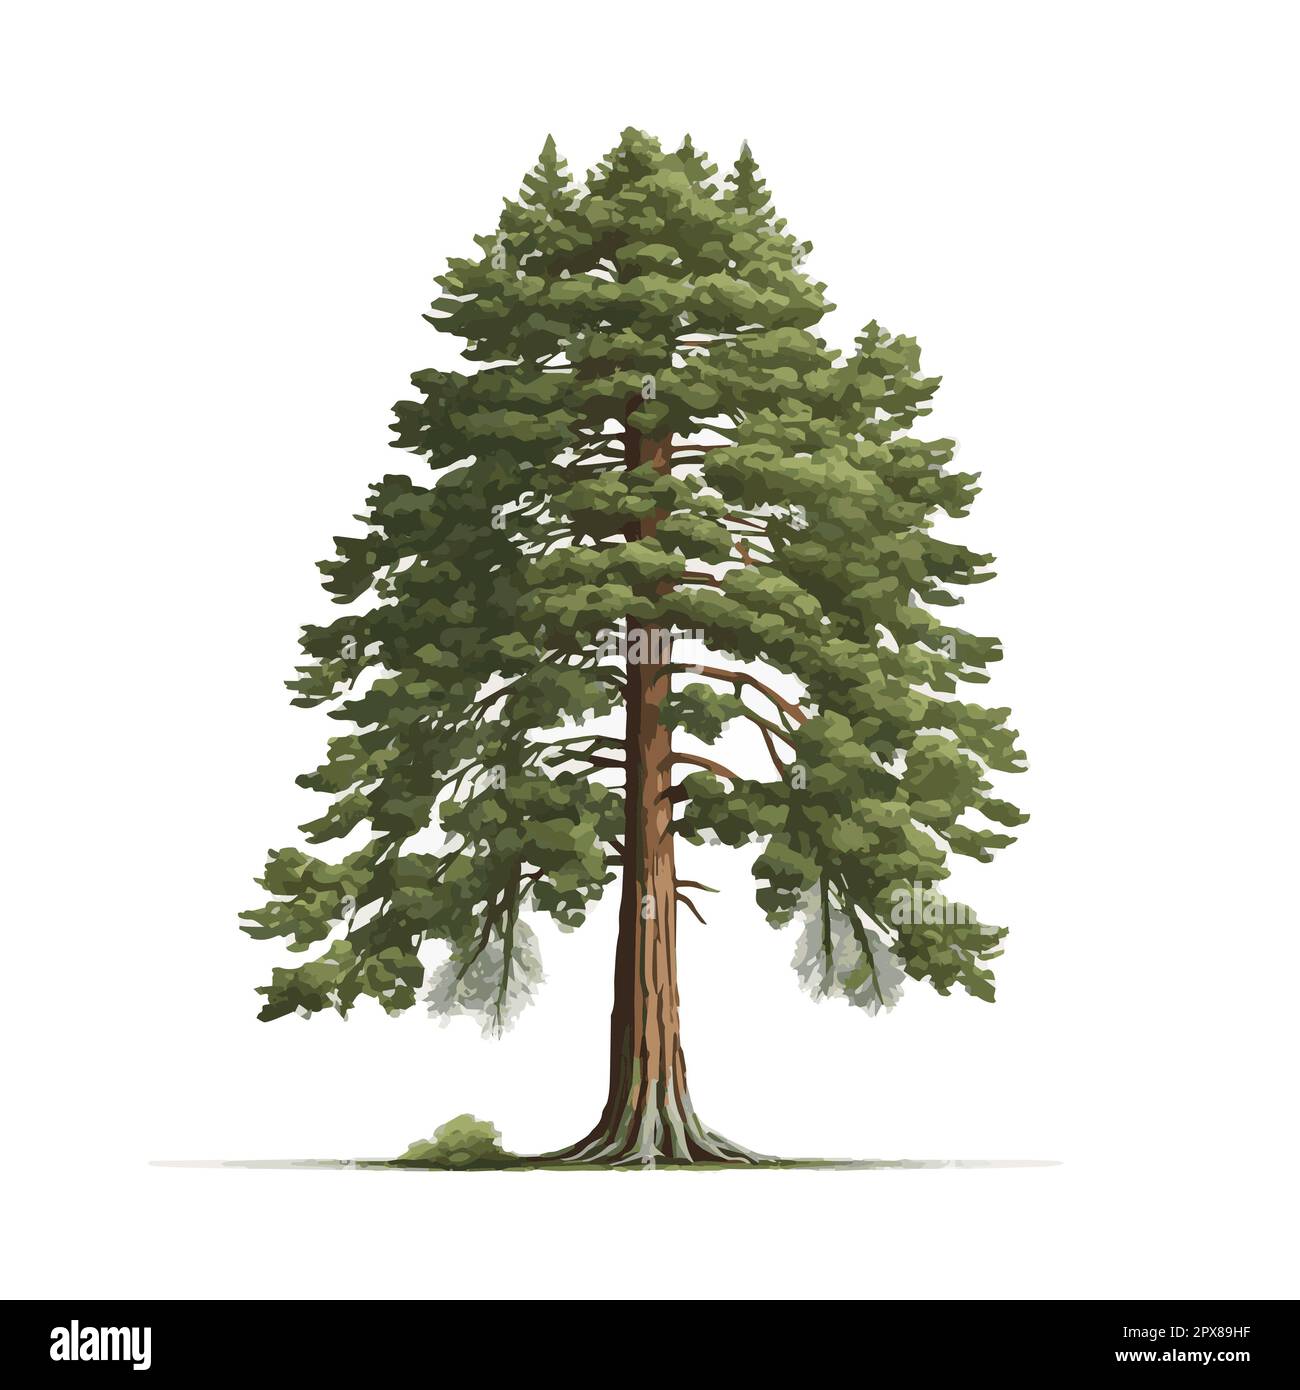 Realistic green tallest tree in the world sequoia on a white background ...